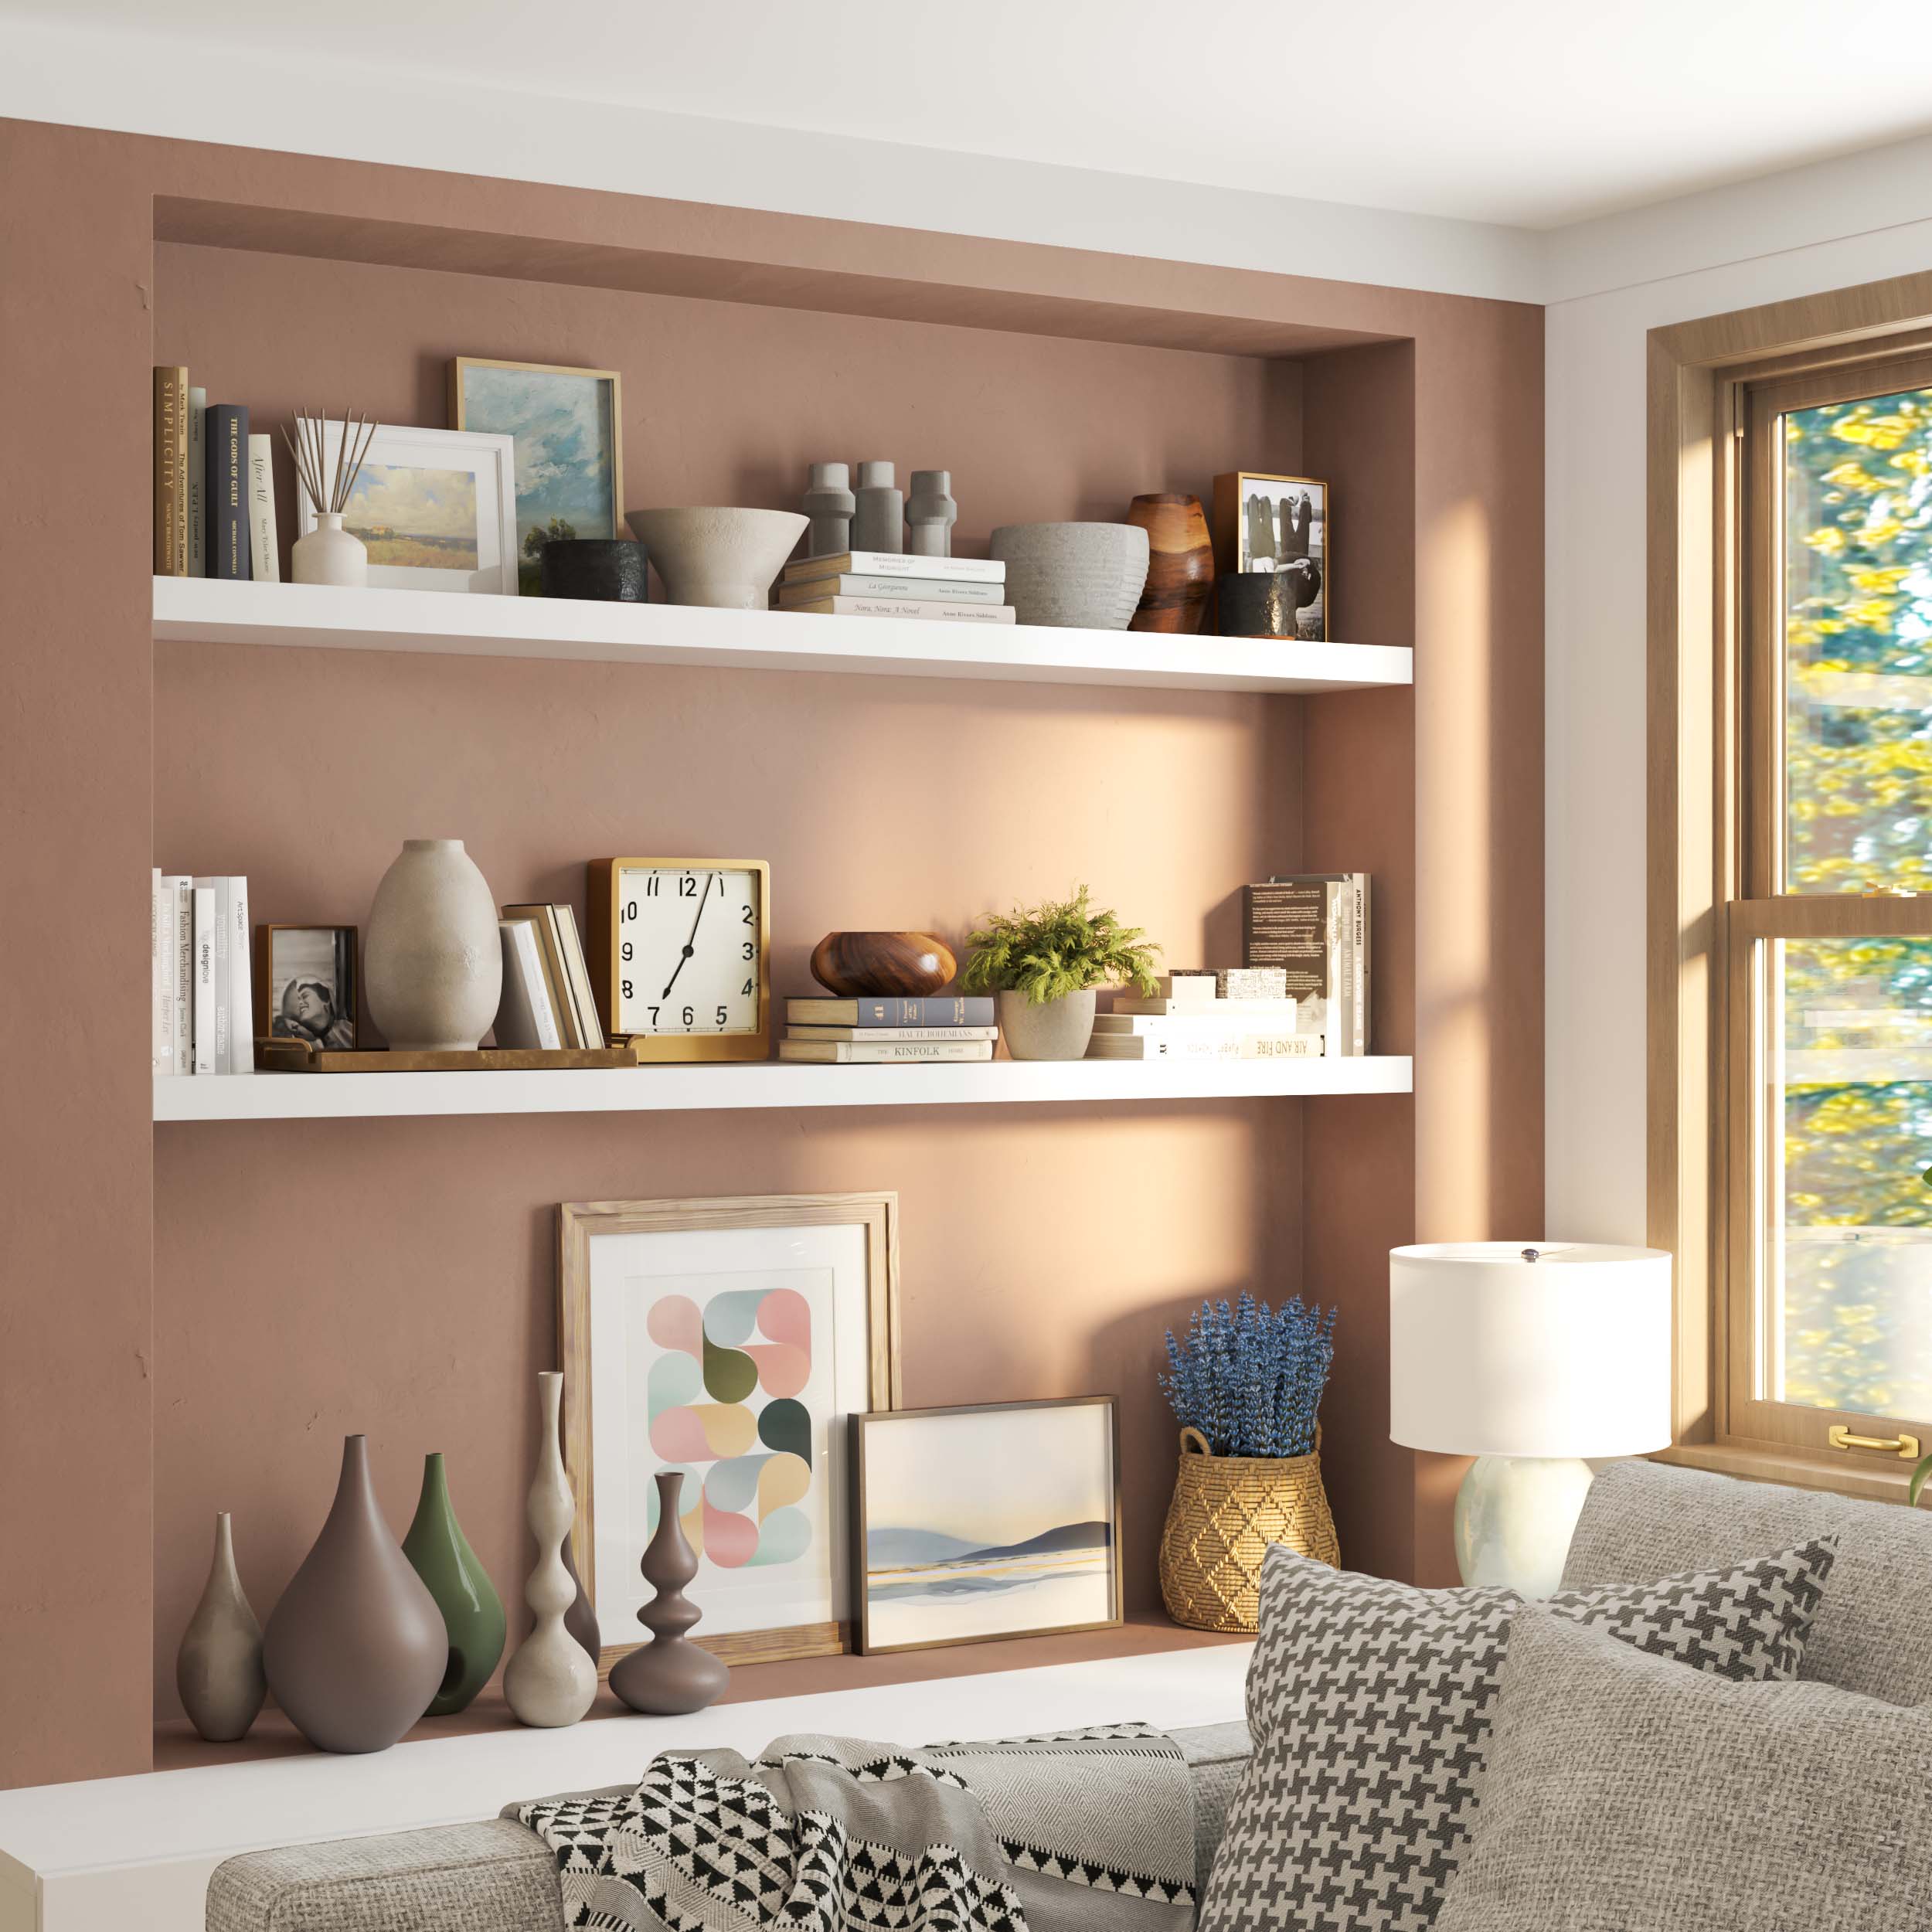 Cozy living room shelves with a mix of books, clocks, and vases in a warm, well-lit environment.